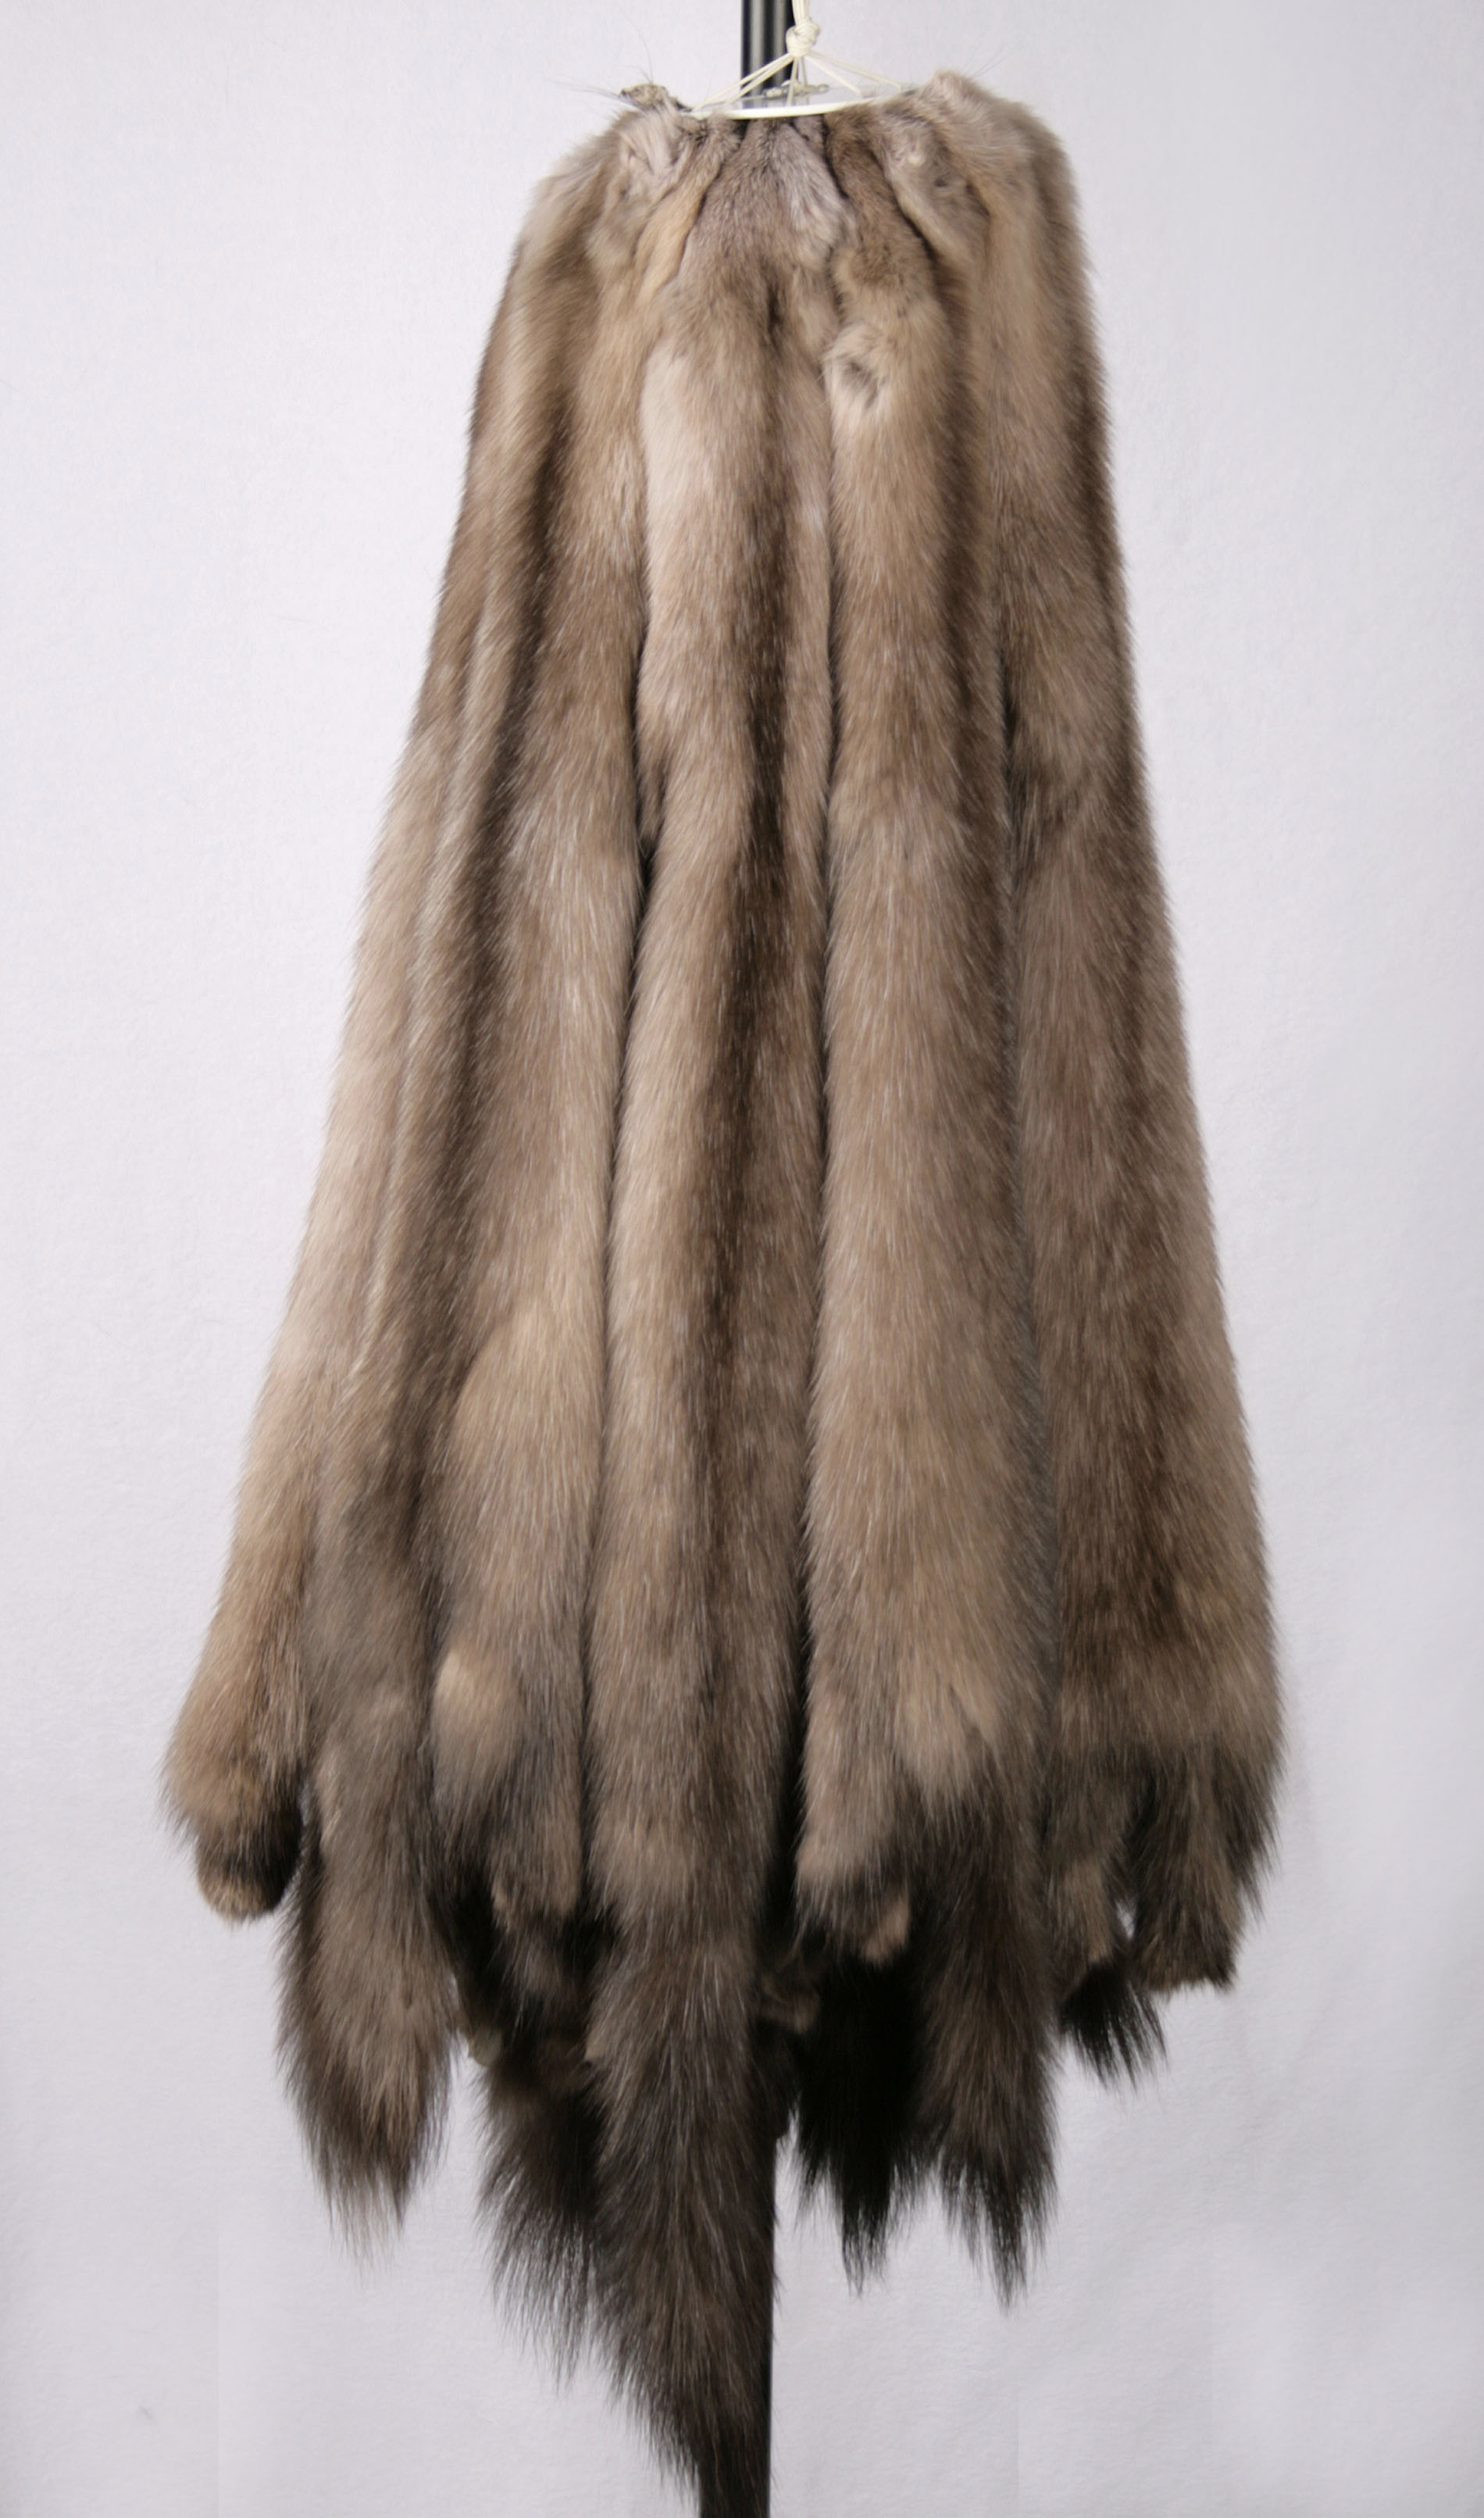 Noble Sable Skins from Russia (Sojuzpushnina)